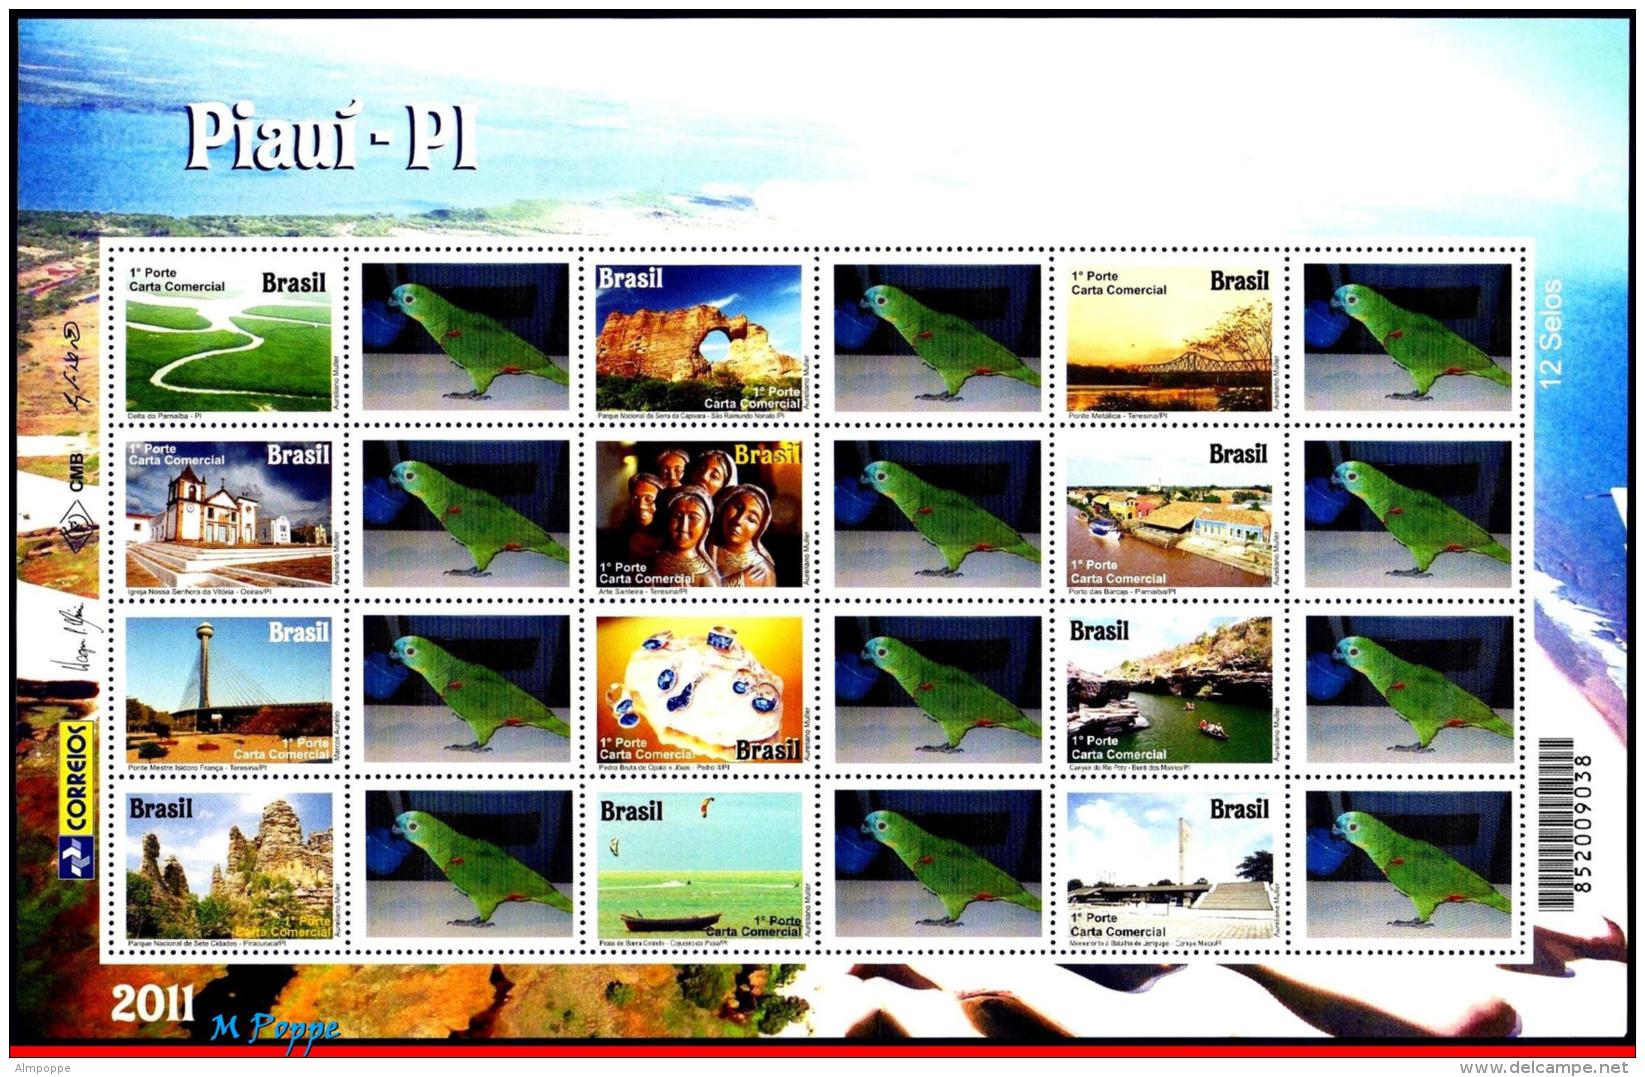 Ref. BR-3187-F6 BRAZIL 2011 CITIES, PIAUI, BRIDGE, CHURCHES,, ART, BEACH, PARROT, PERSONALIZED MNH 12V Sc# 3187 - Personalized Stamps